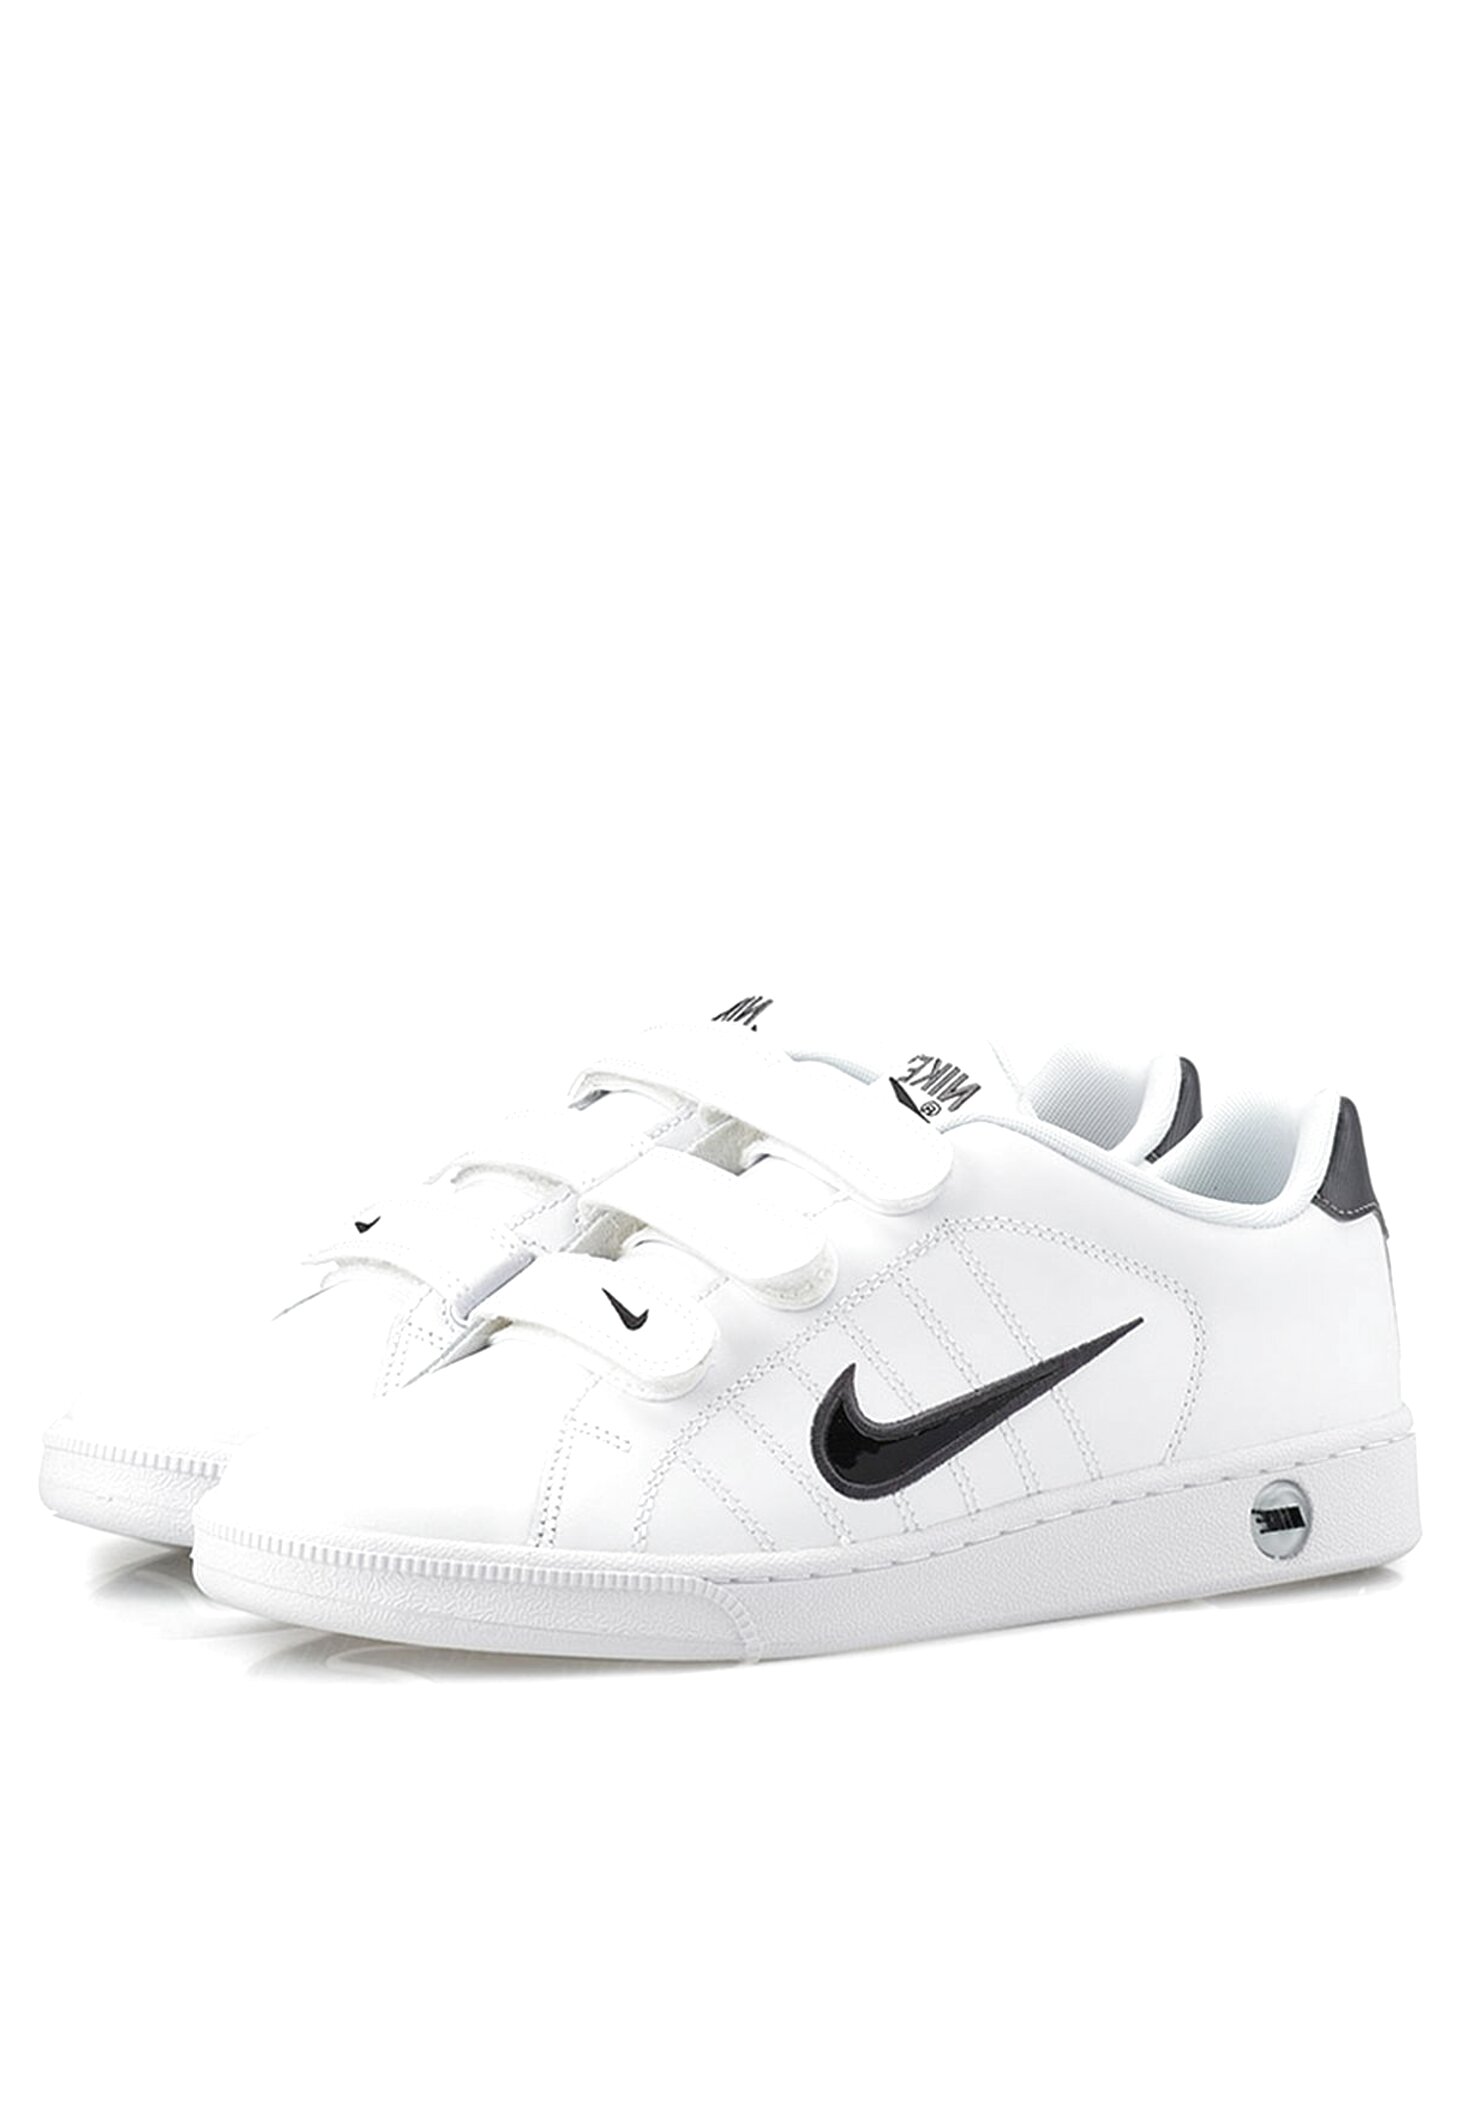 nike court tradition mens